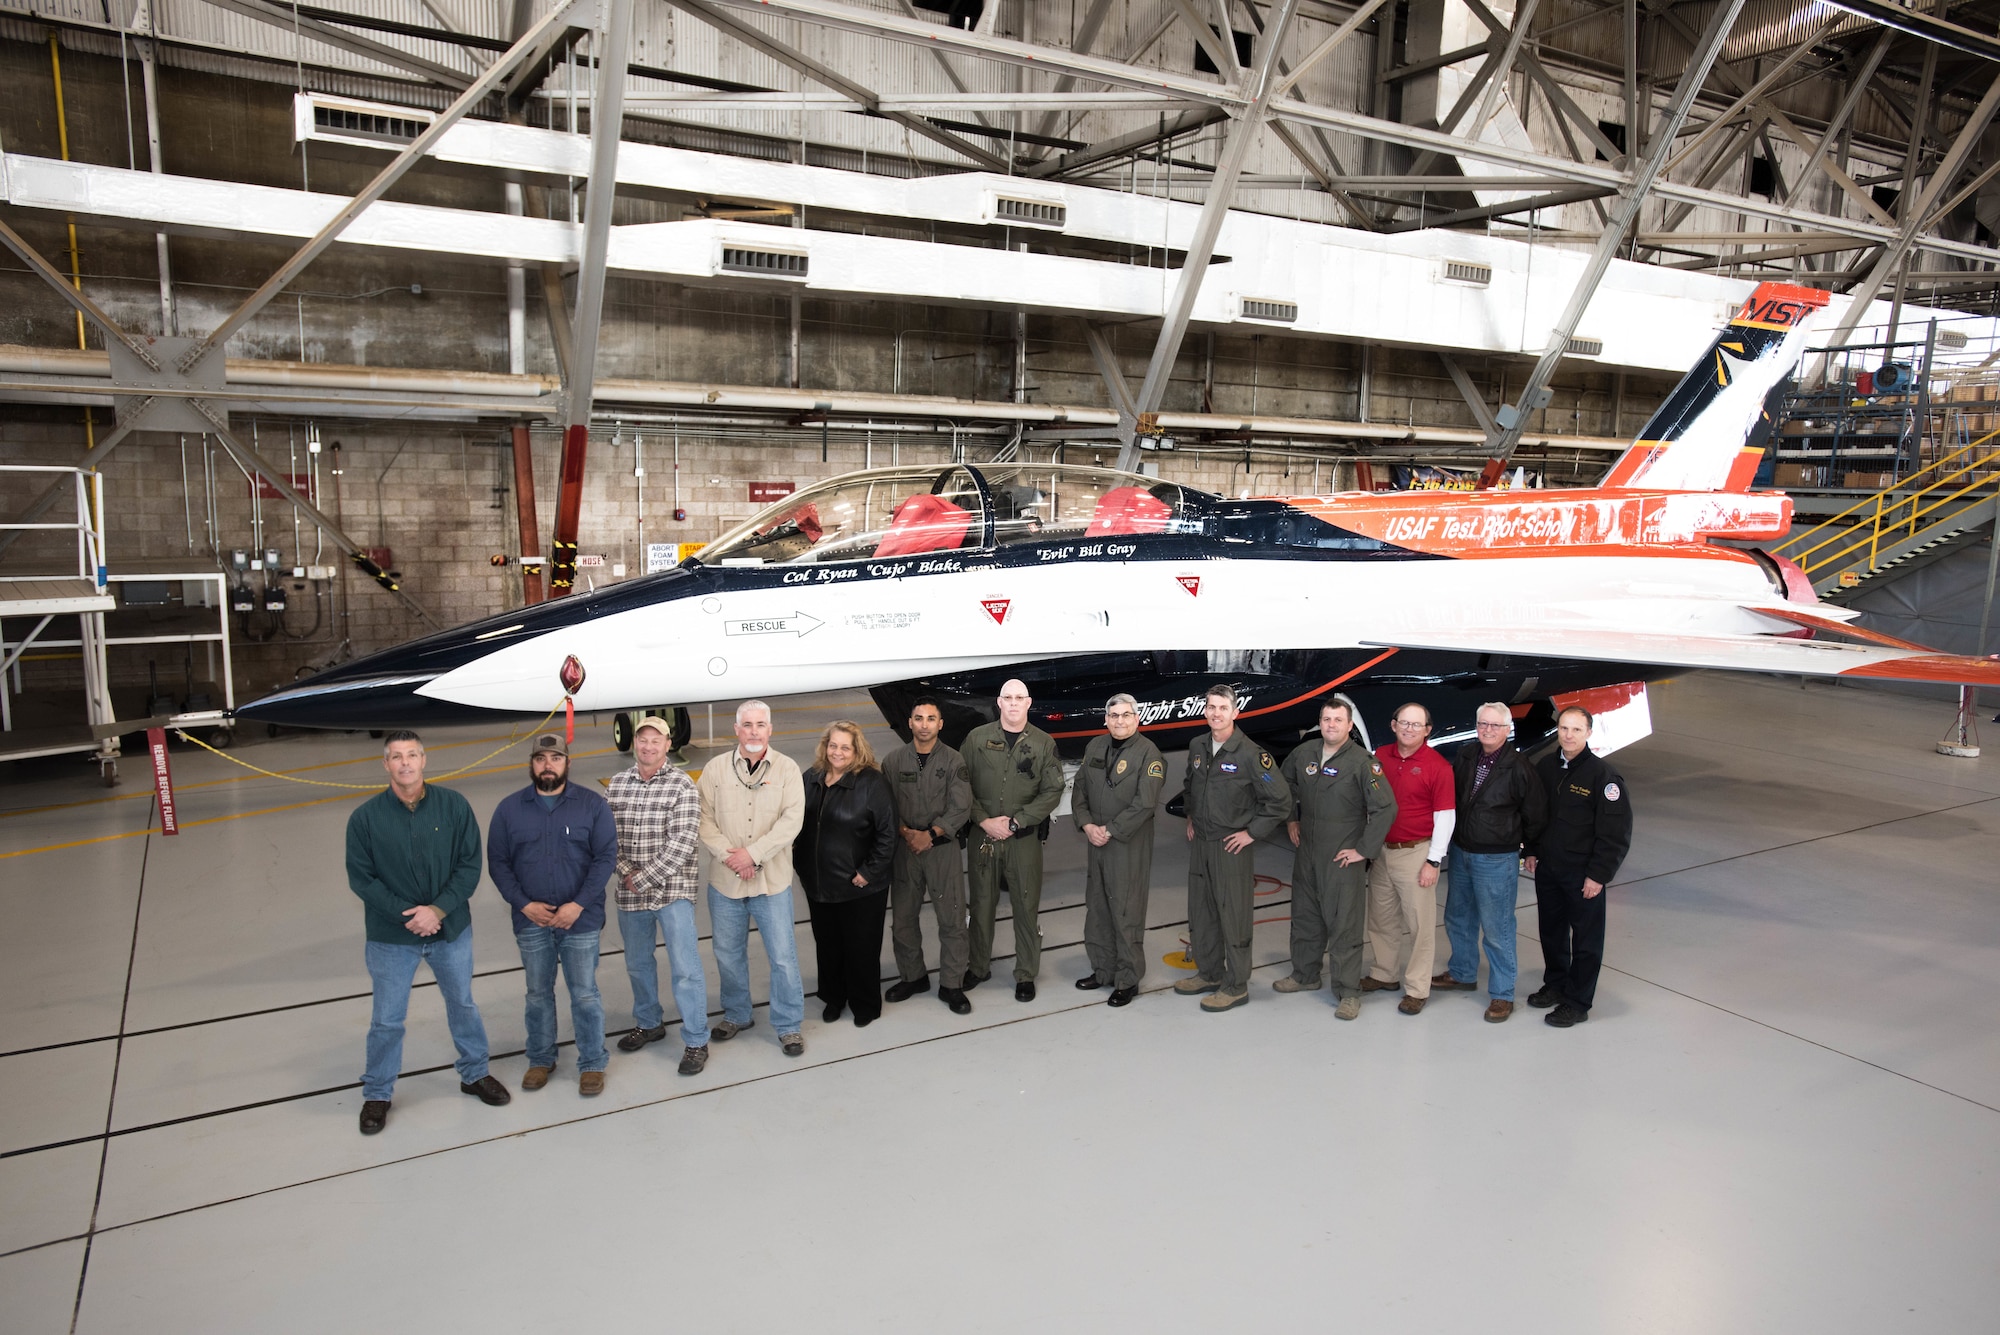 Members of the U.S. Air Force Test Pilot School and aircraft maintainers pose for a photo in front of the school’s NF-16D VISTA in-flight simulator The VISTA is sporting a new paint scheme designed by aviation artist Mike Machat. The one-of-a-kind aircraft is a staple of the school. VISTA is an acronym that stands for Variable stability In-flight Simulator Test Aircraft. The modified F-16 can be configured to fly like almost any aircraft type. (U.S. Air Force photo by Joe Jones)